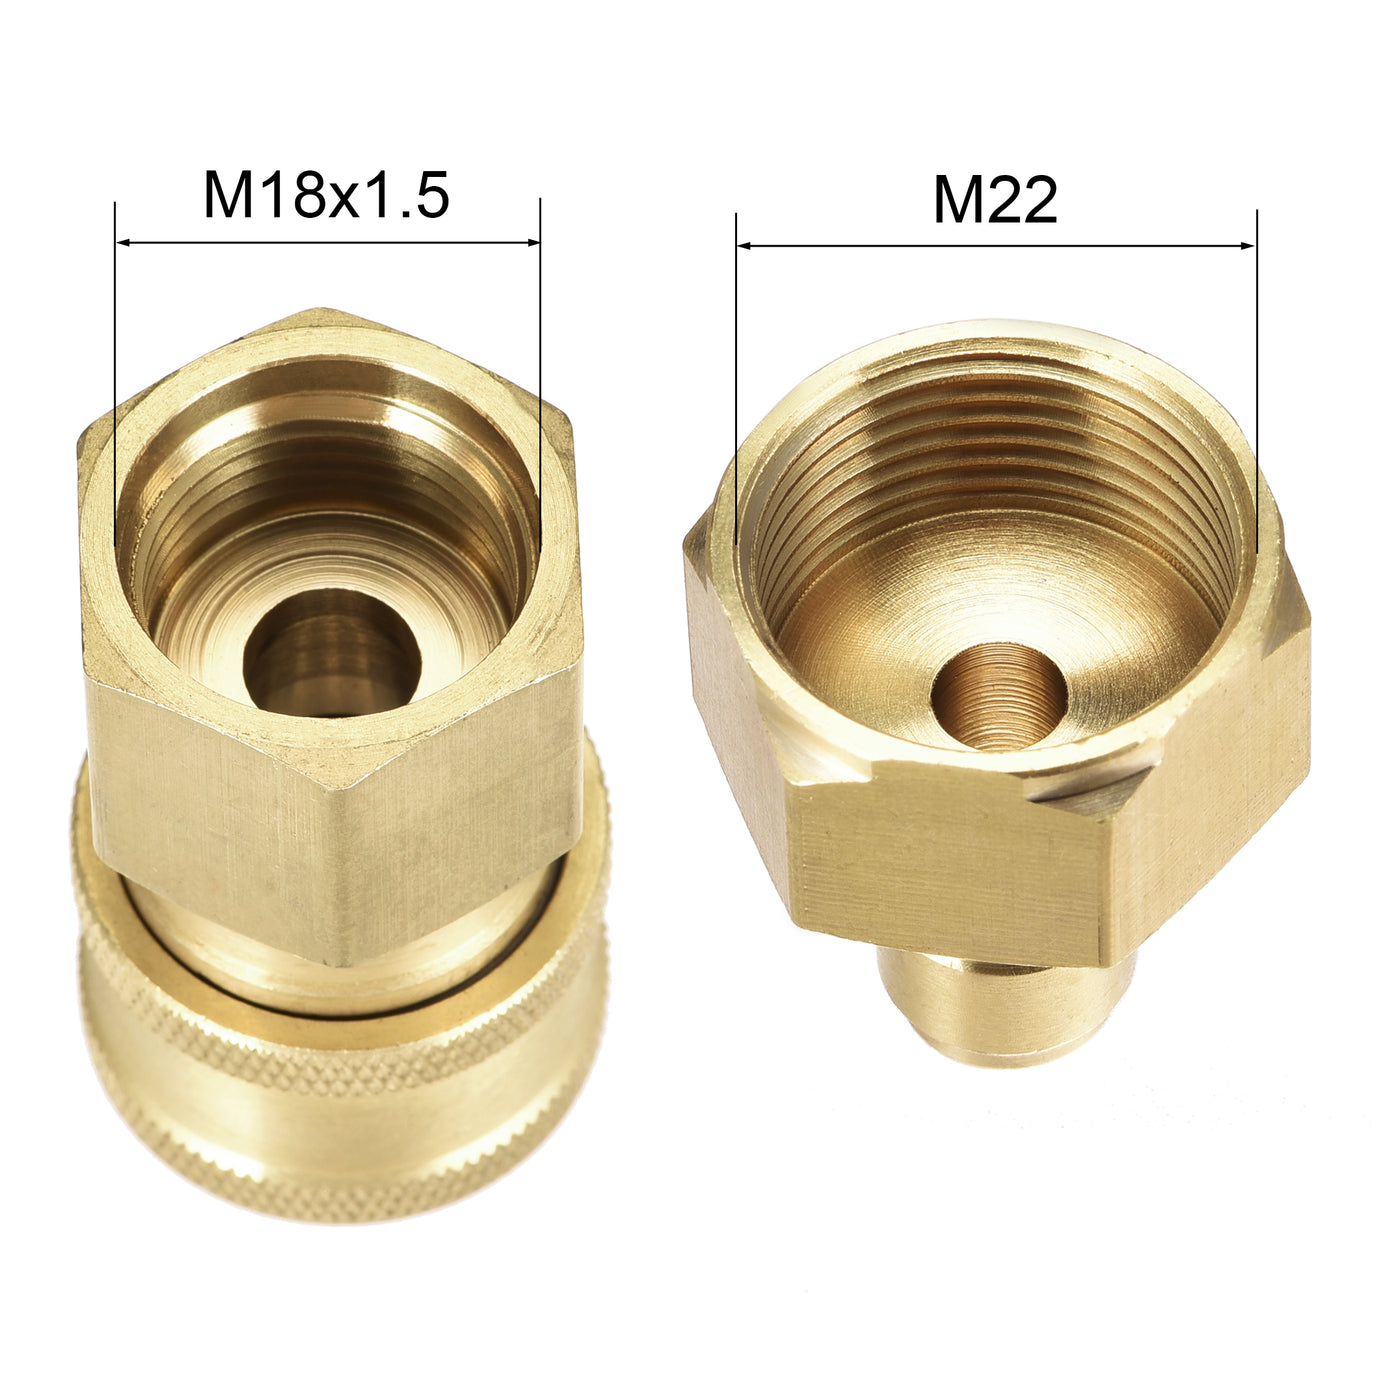 uxcell Uxcell Brass Quick Connect Set Fittings M22 & M18x1.5 Female Thread